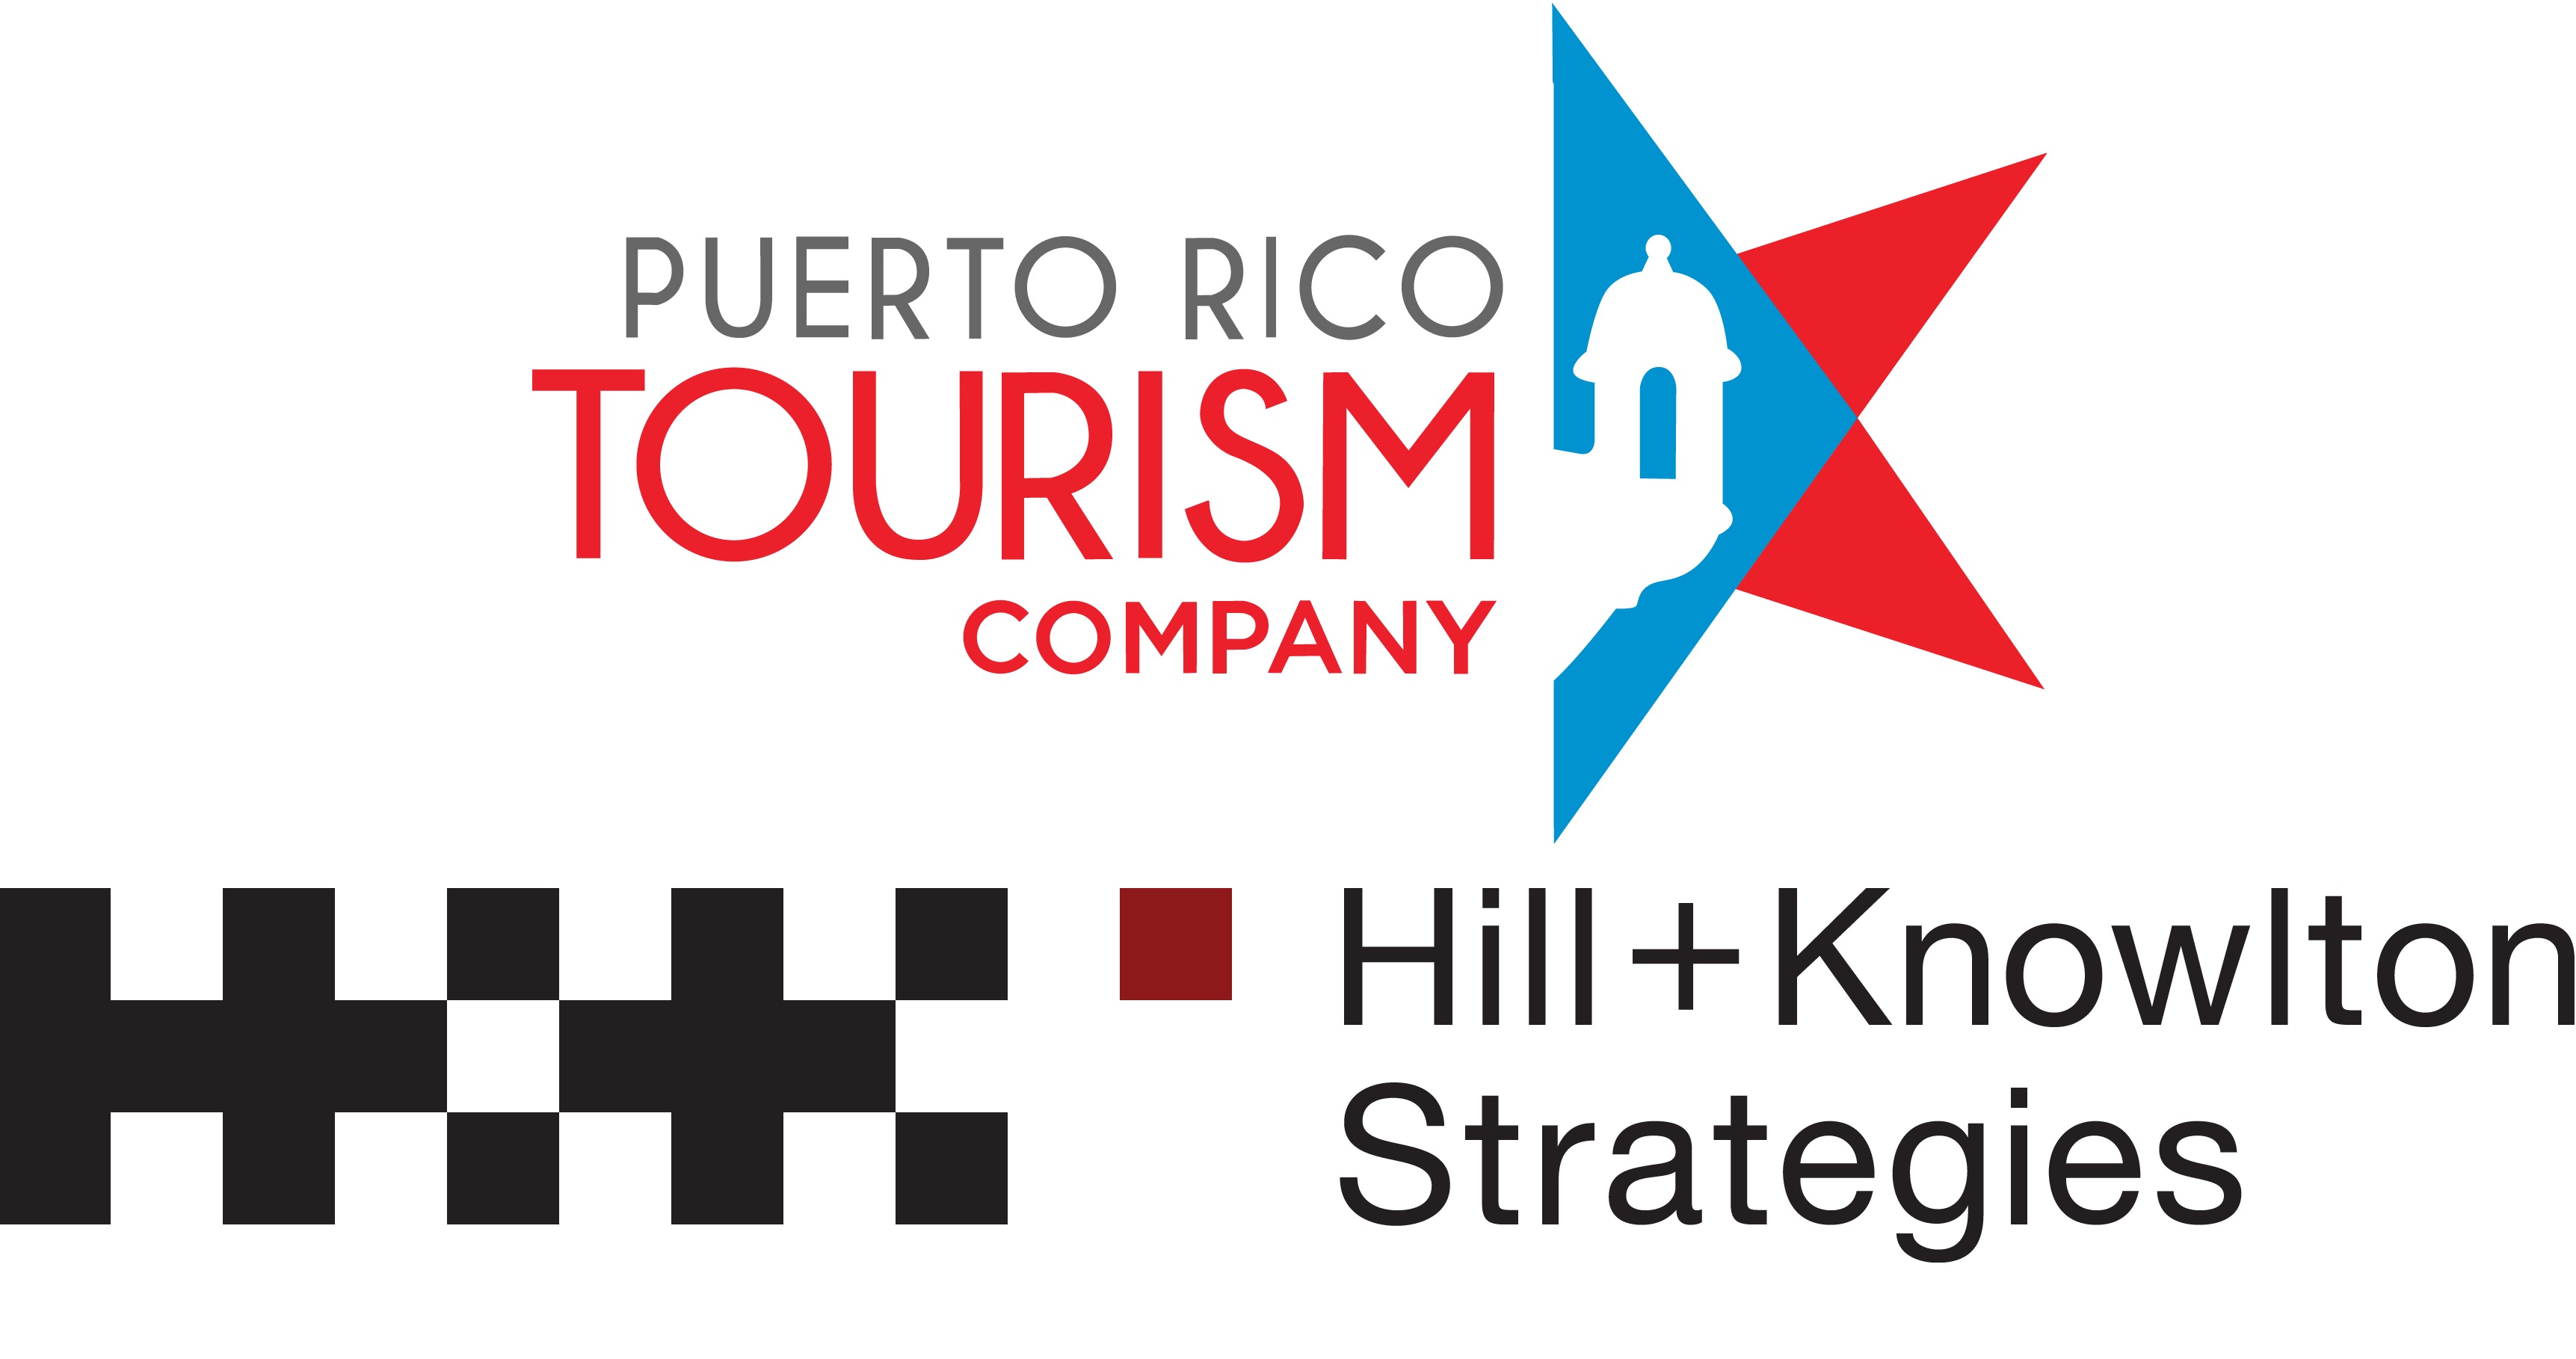 Establishing Puerto Rico as a Global Destination - Logo - https://s39939.pcdn.co/wp-content/uploads/2018/11/Traditional-Campaign.jpg